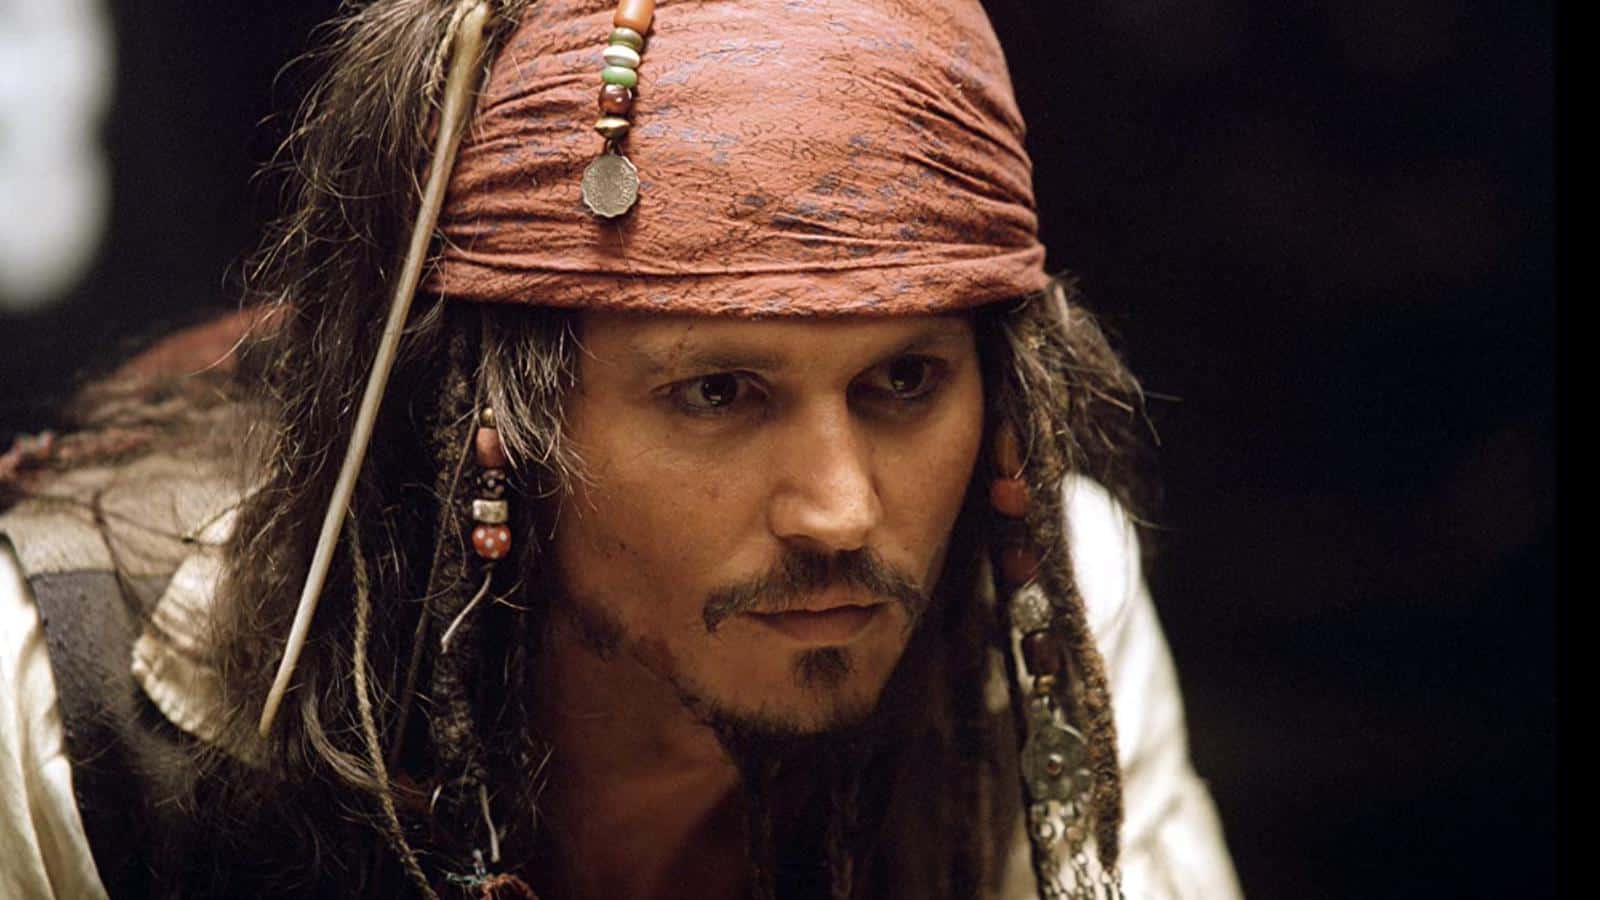 Johnny Depp As Captain Jack Sparrow Pirates of the Caribbean_ The Curse of the Black Pearl (2003) Buena Vista Pictures